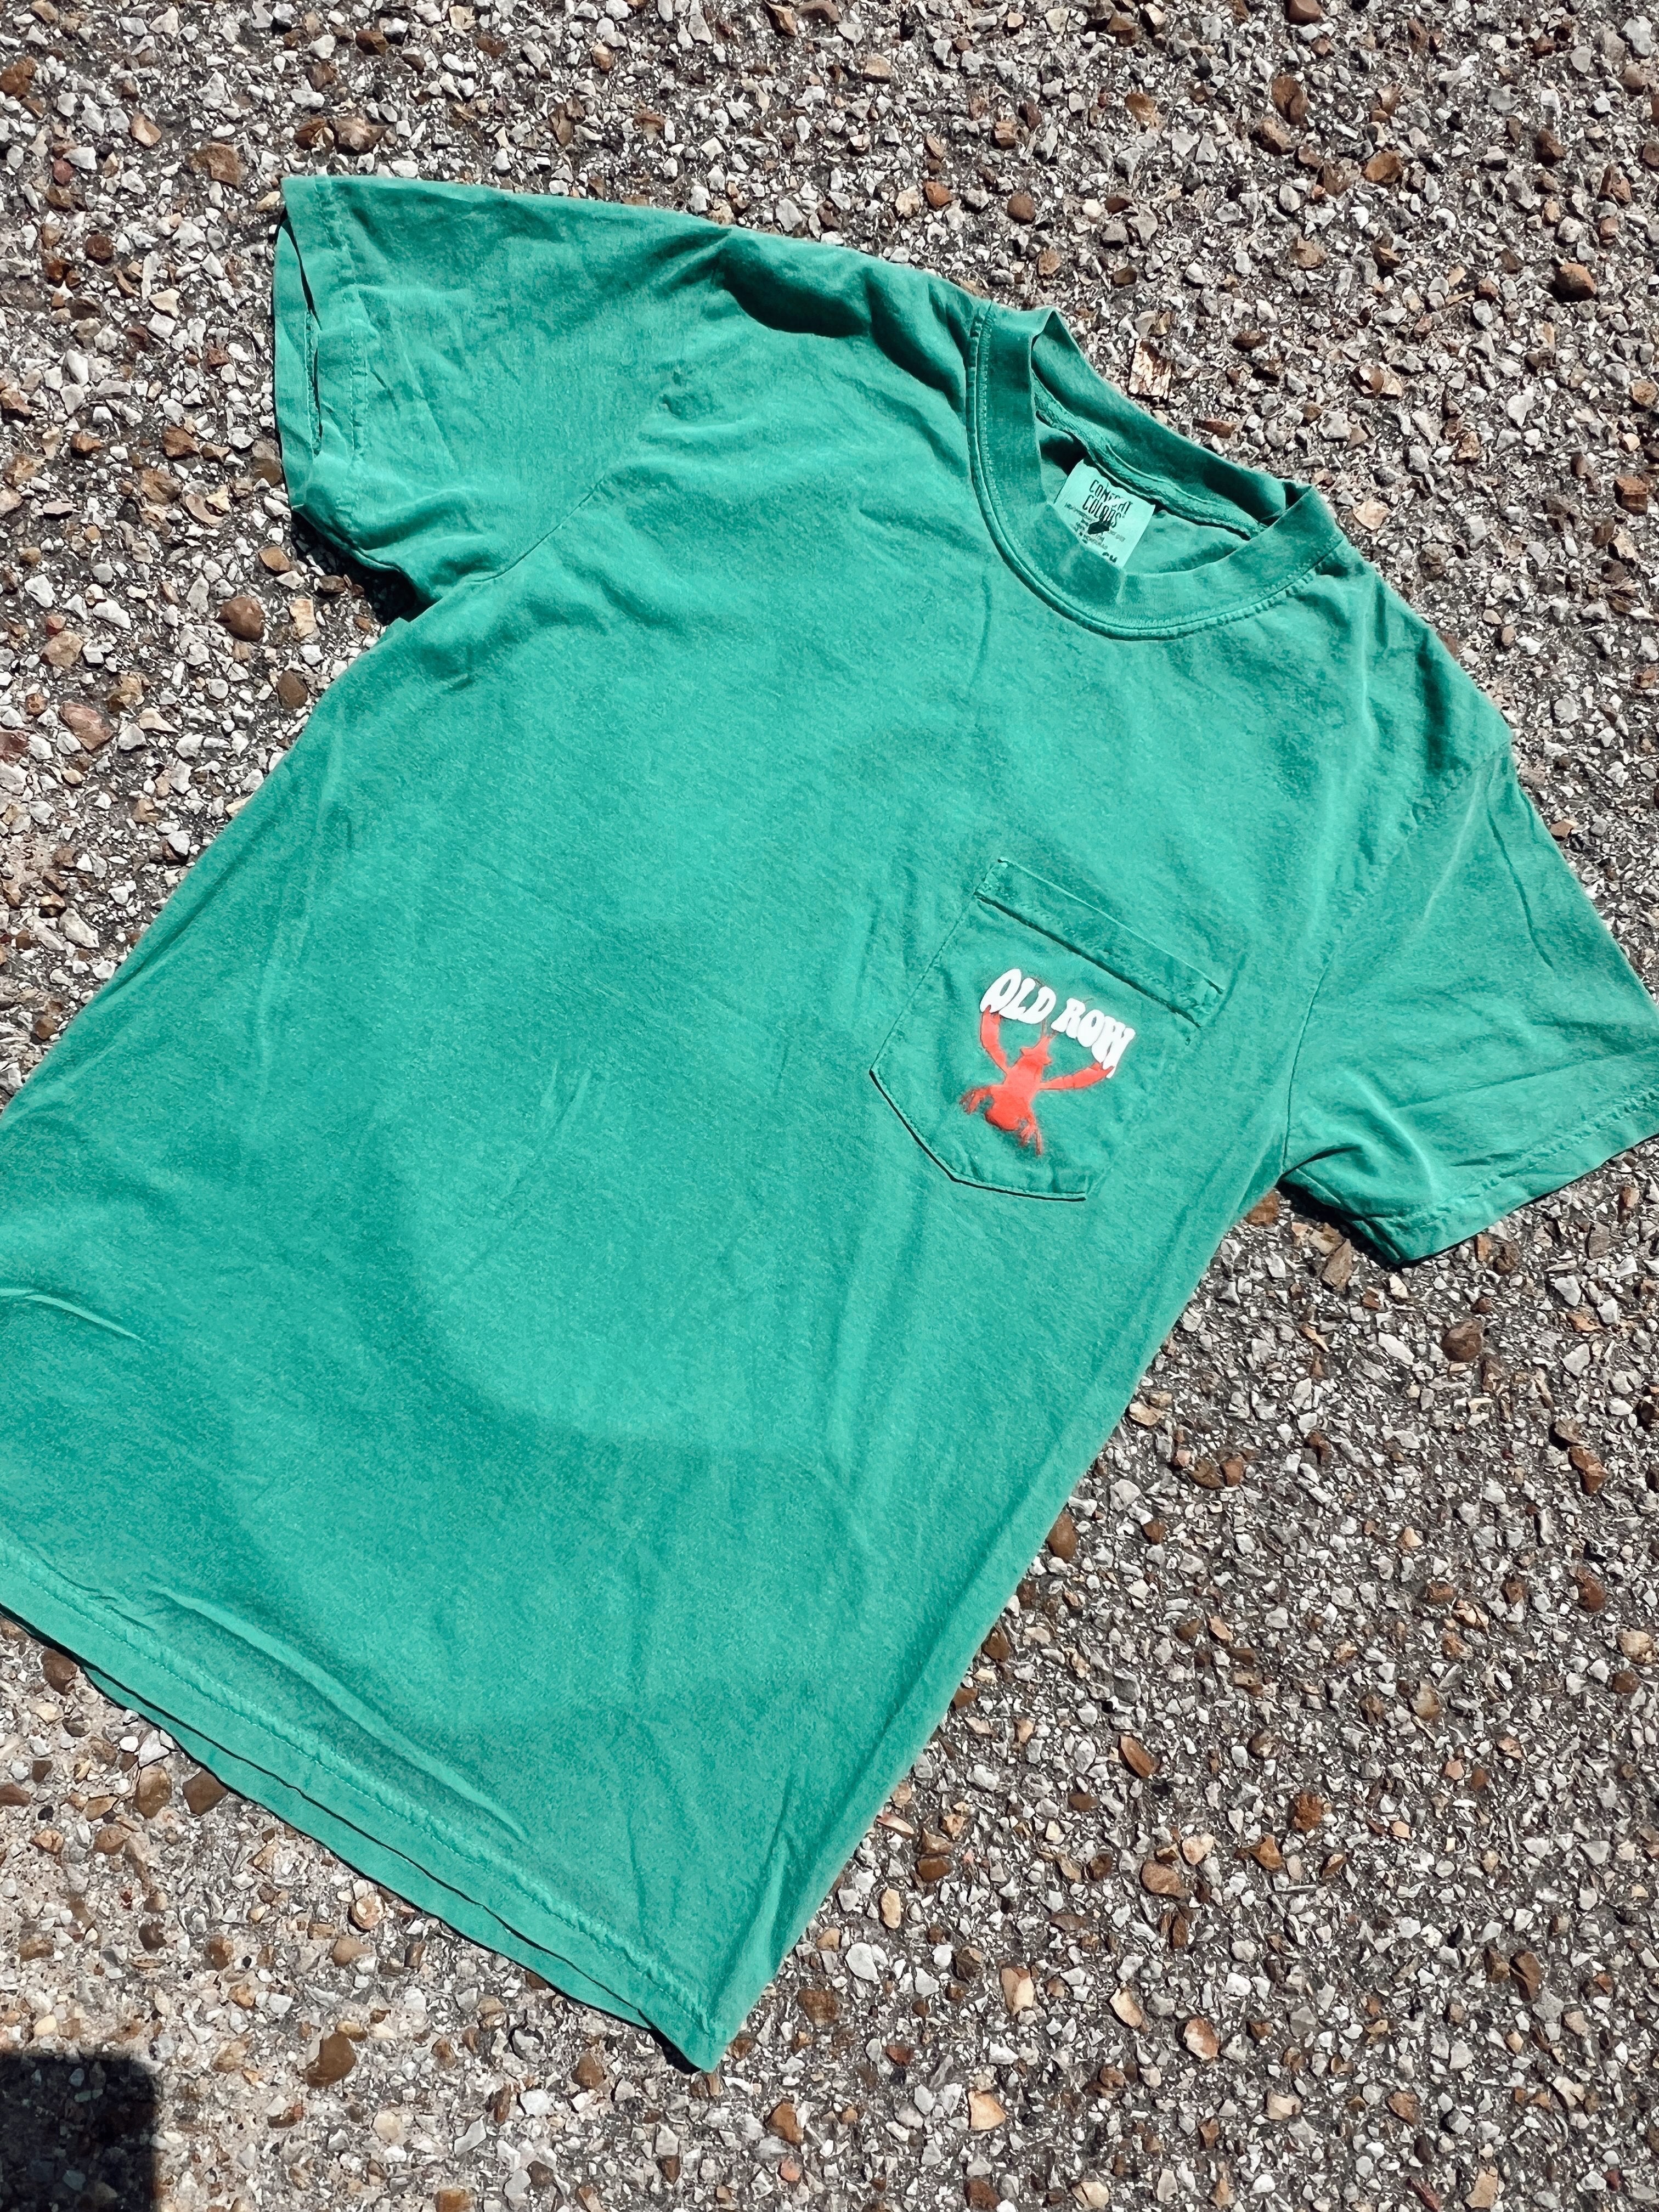 The Crawdaddy Pocket Tee by Old Row